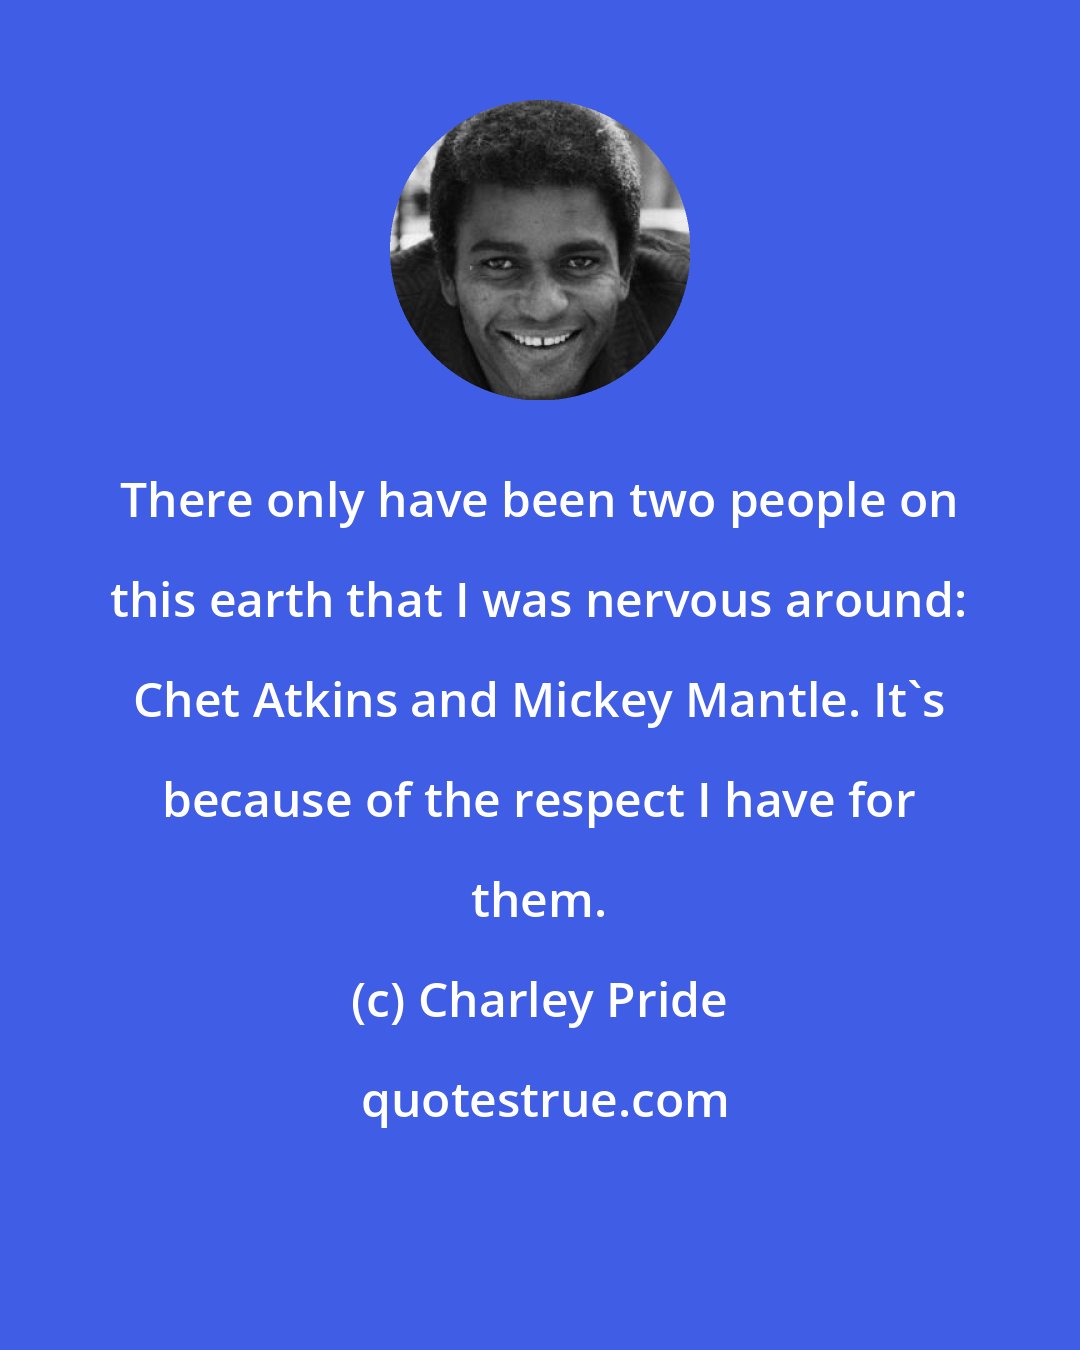 Charley Pride: There only have been two people on this earth that I was nervous around: Chet Atkins and Mickey Mantle. It's because of the respect I have for them.